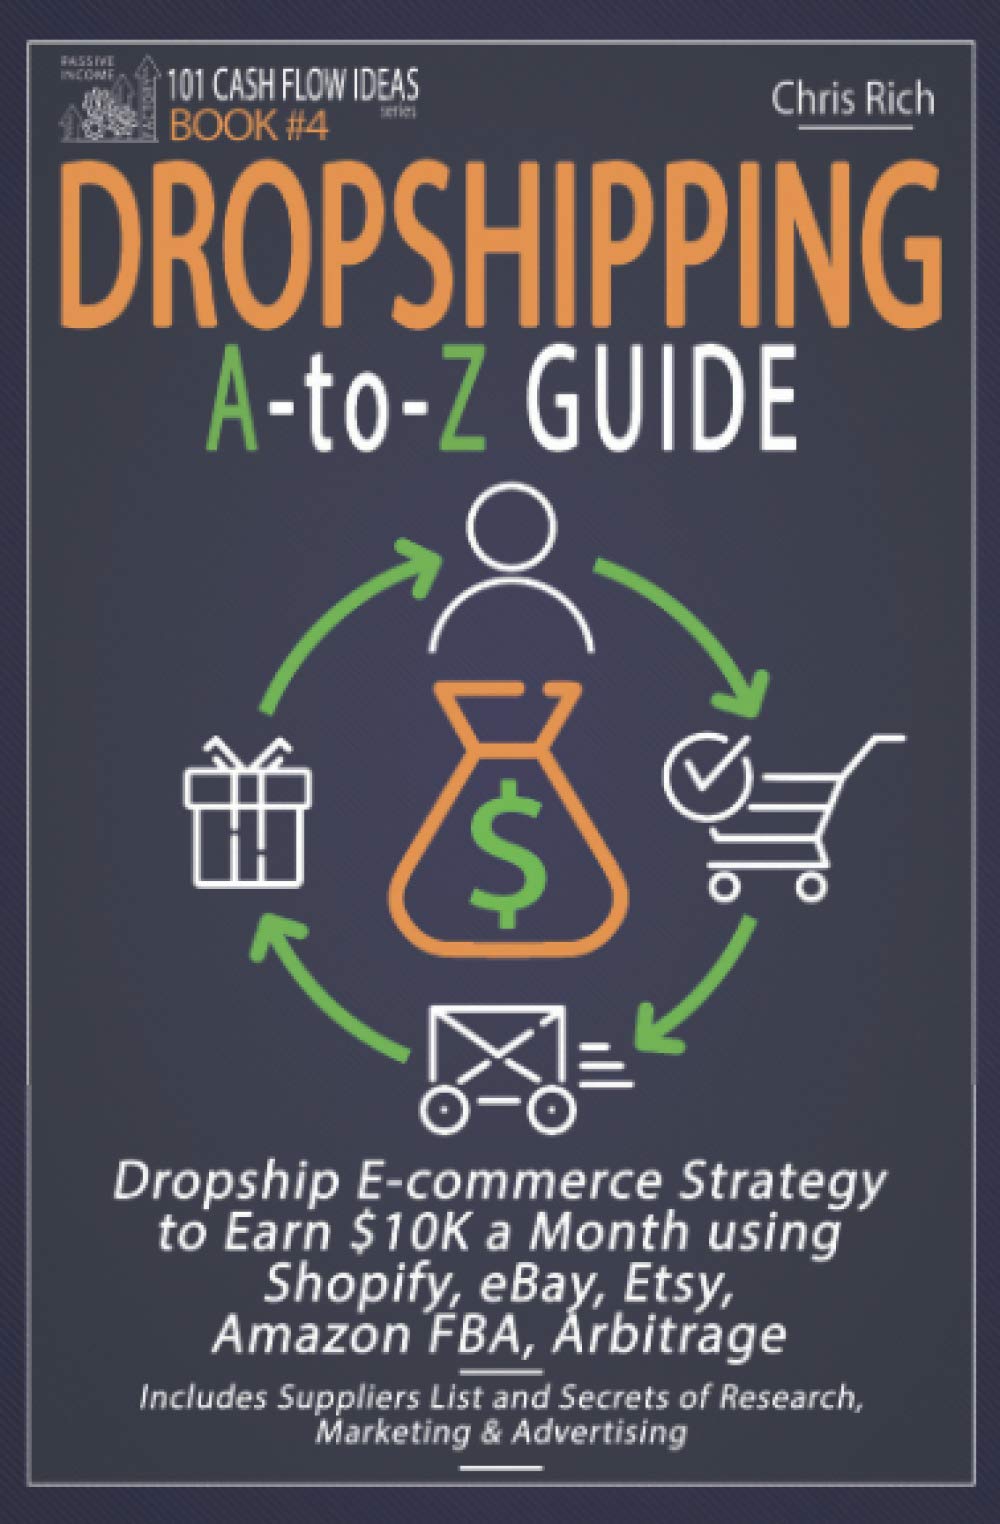 Dropshipping A-to-Z Guide: Dropship E-commerce Strategy to Earn $10K a Month using Shopify, eBay, Etsy, Amazon FBA, Arbitrage